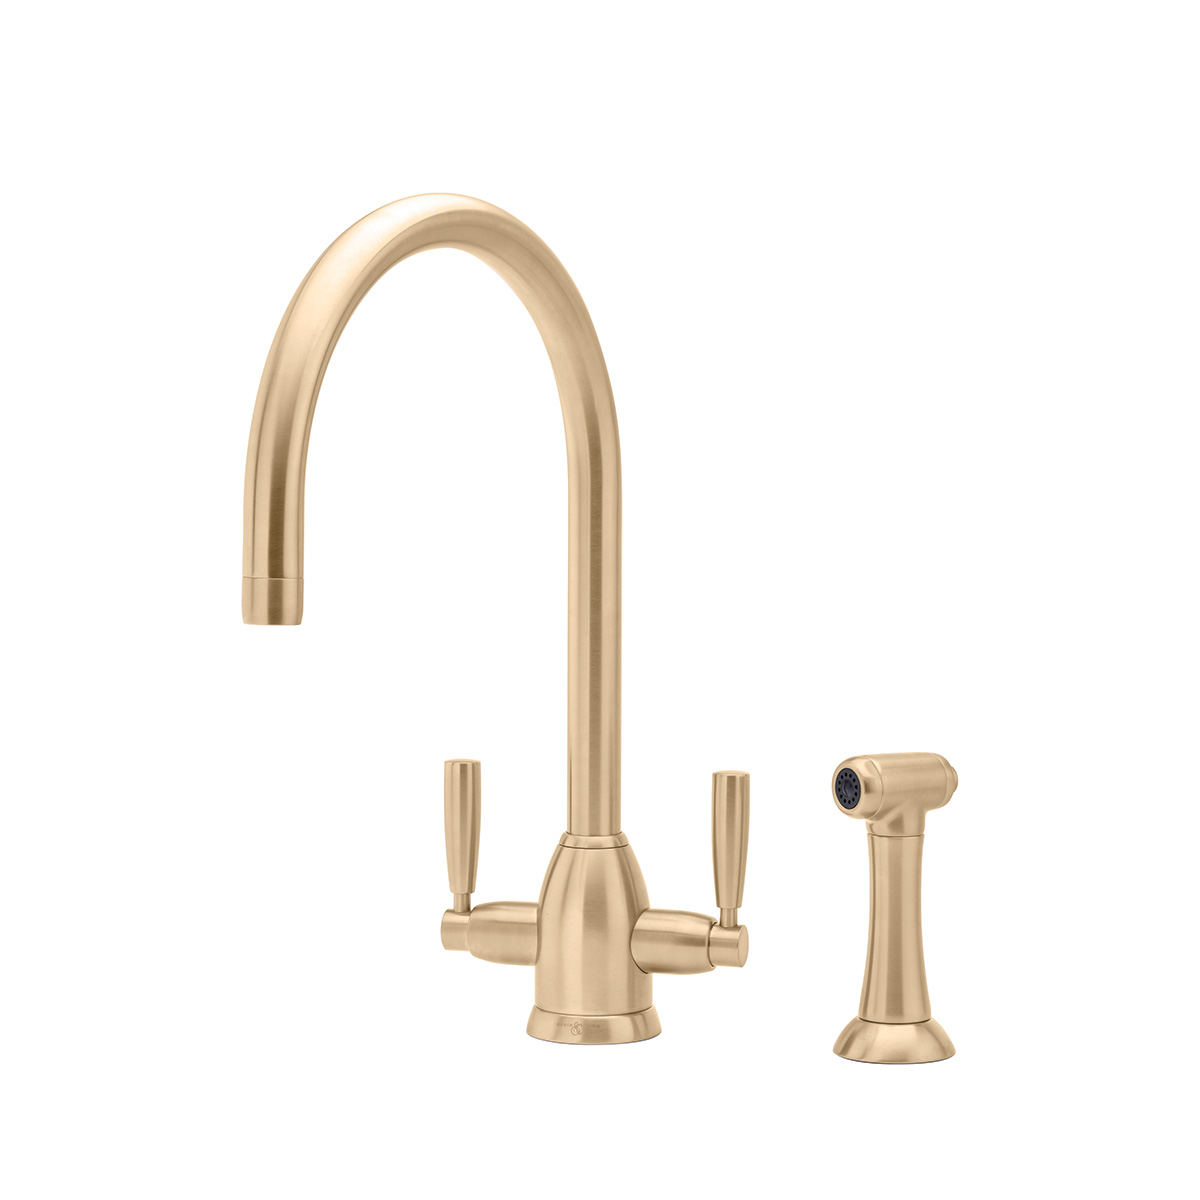 Shaws by Perrin & Rowe Silverdale kitchen mixer with spray rinse in Satin Brass. Oberon style kitchen mixer AUSH.4866. Distributed in Australia by Luxe by Design, Brisbane.